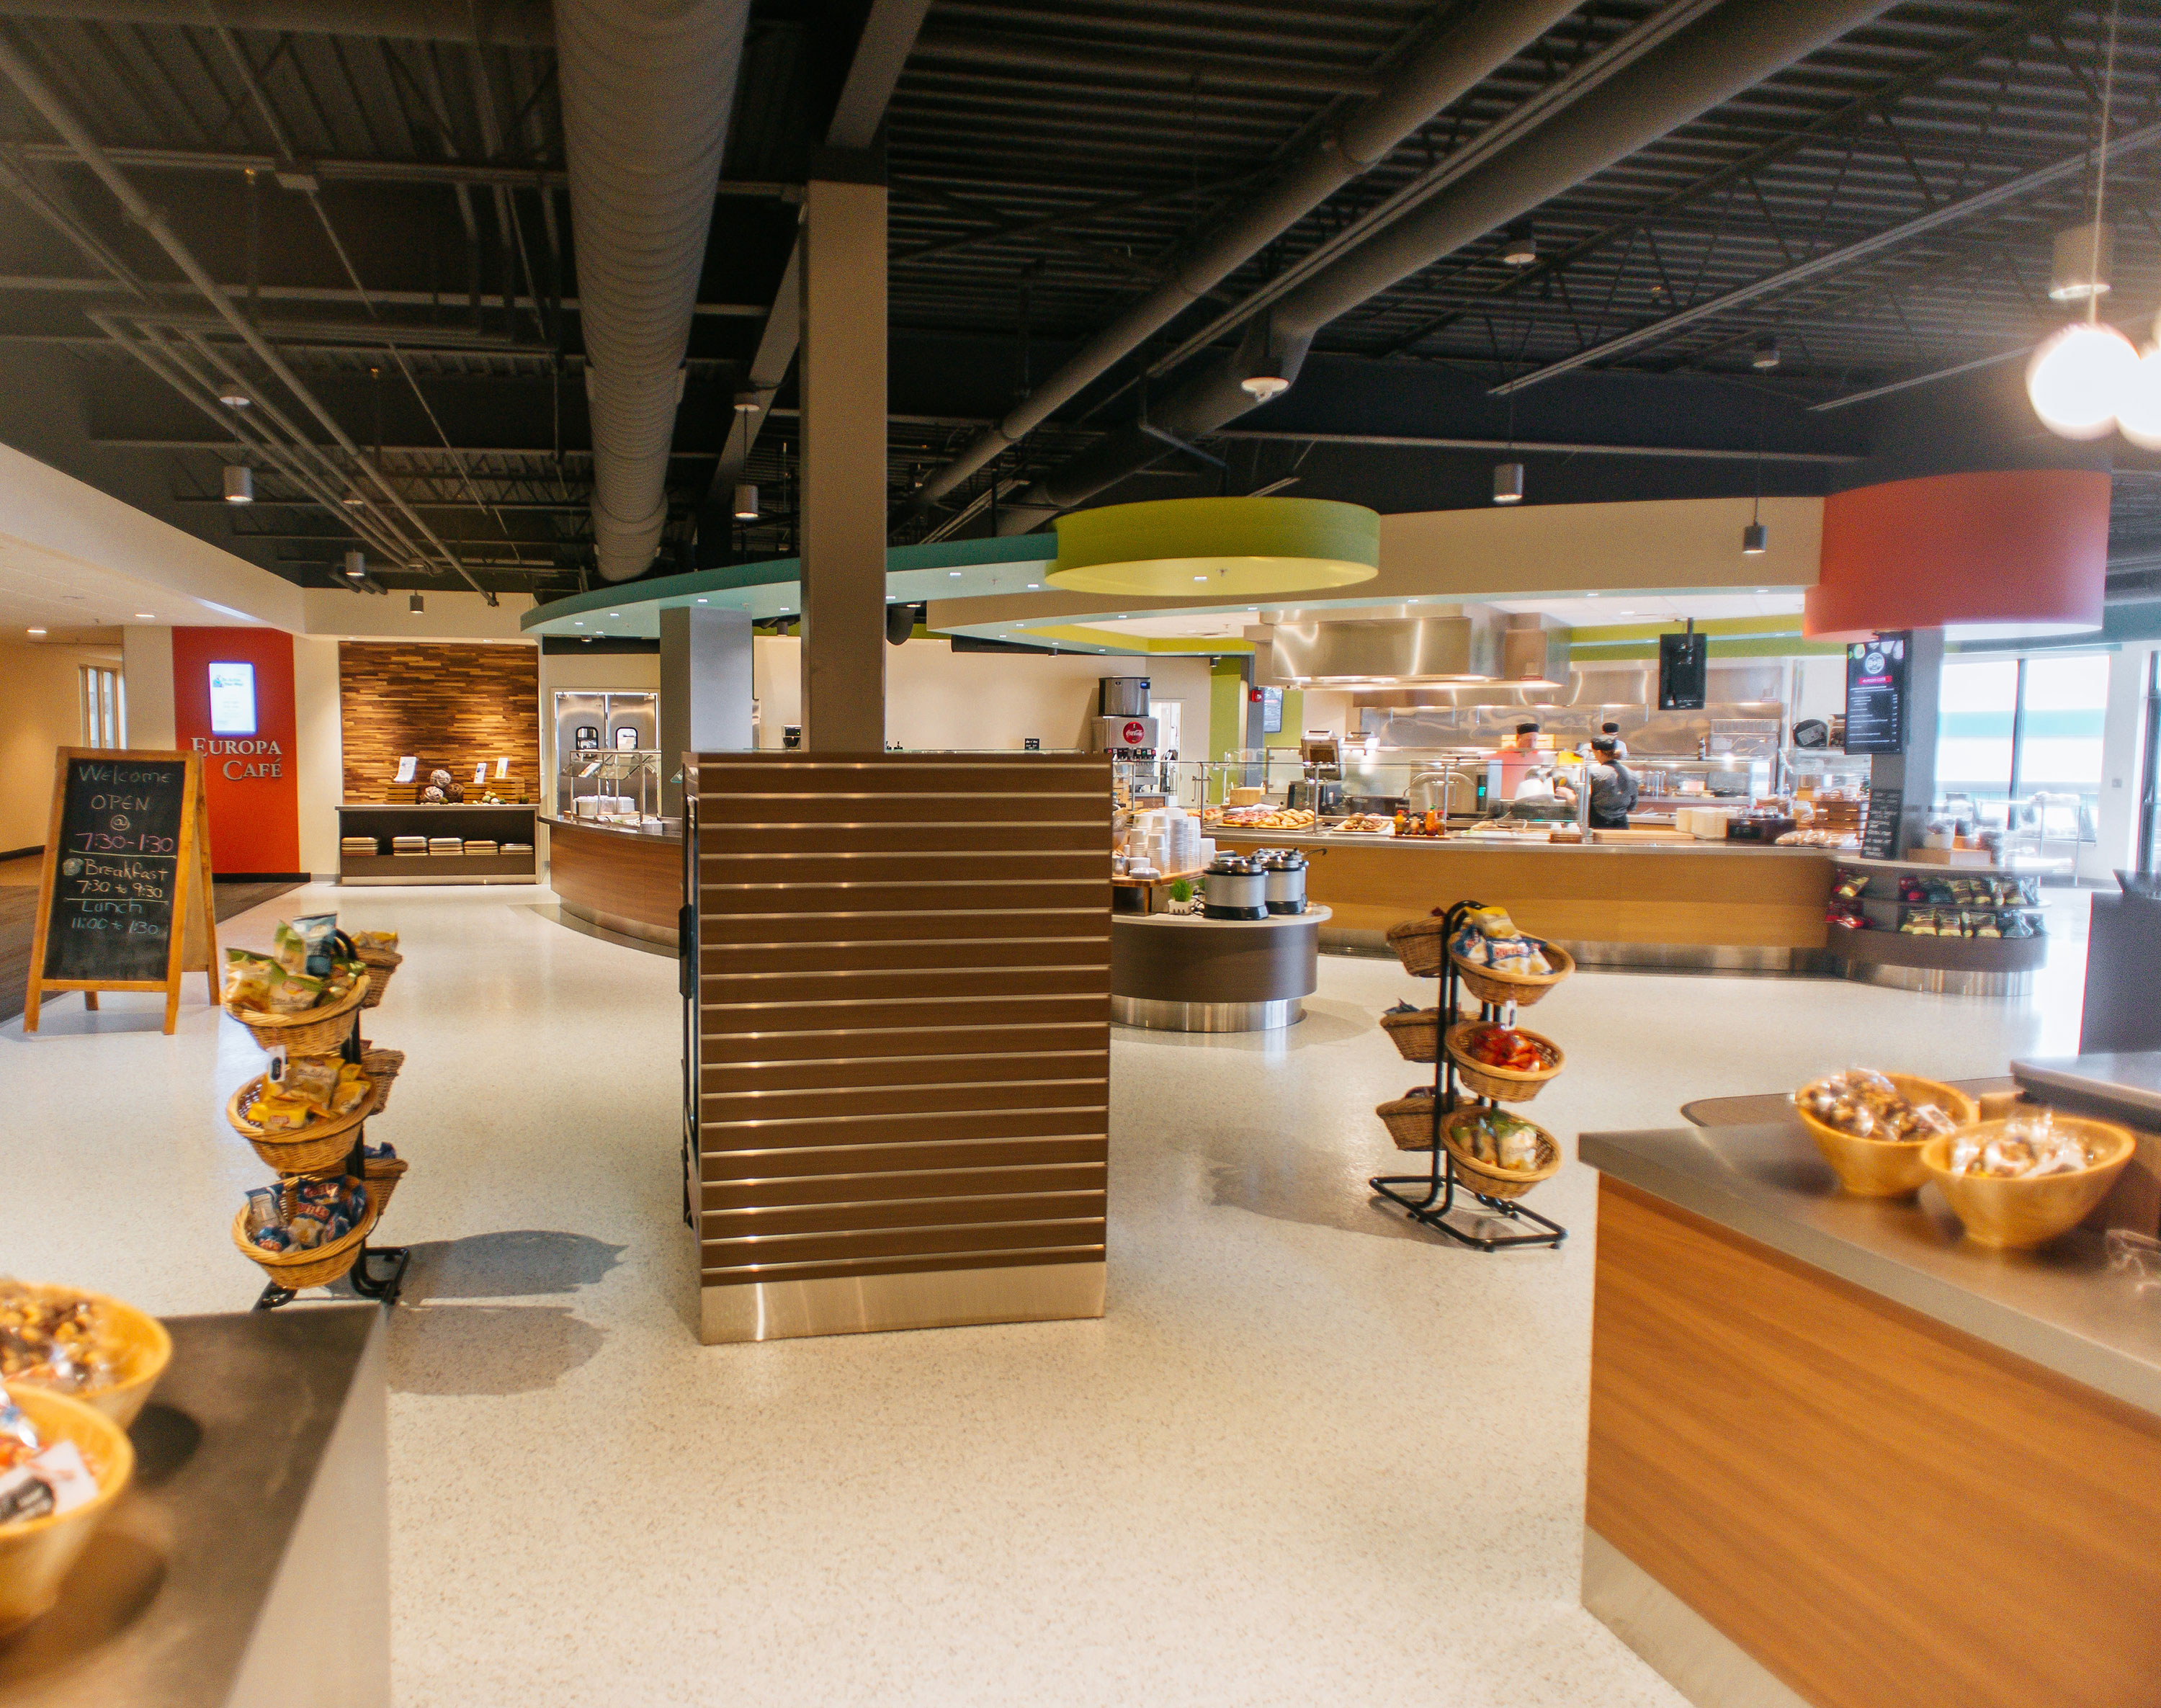 Commercial Kitchen University Dining Area Self Service Bar